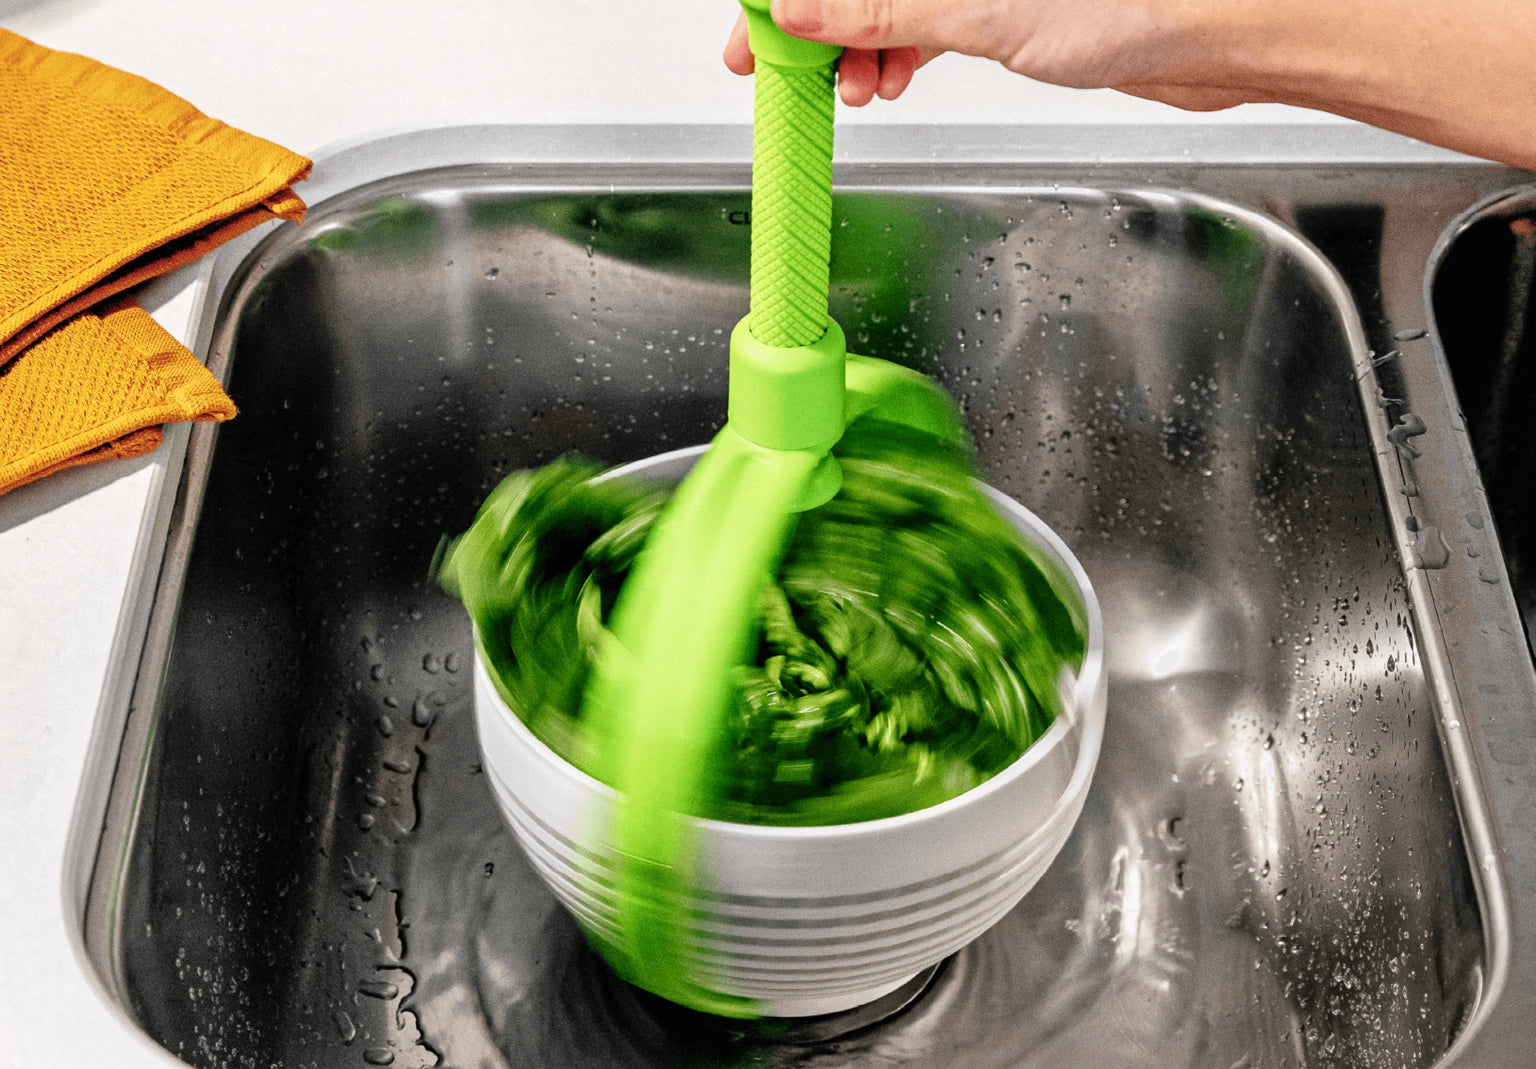 Dropship Spina, Easy-To-Use Salad Spinner, Non-Scratch, Nylon Spinning  Colander, Lettuce Spinner, Colander With Collapsible Handle, Green to  Sell Online at a Lower Price